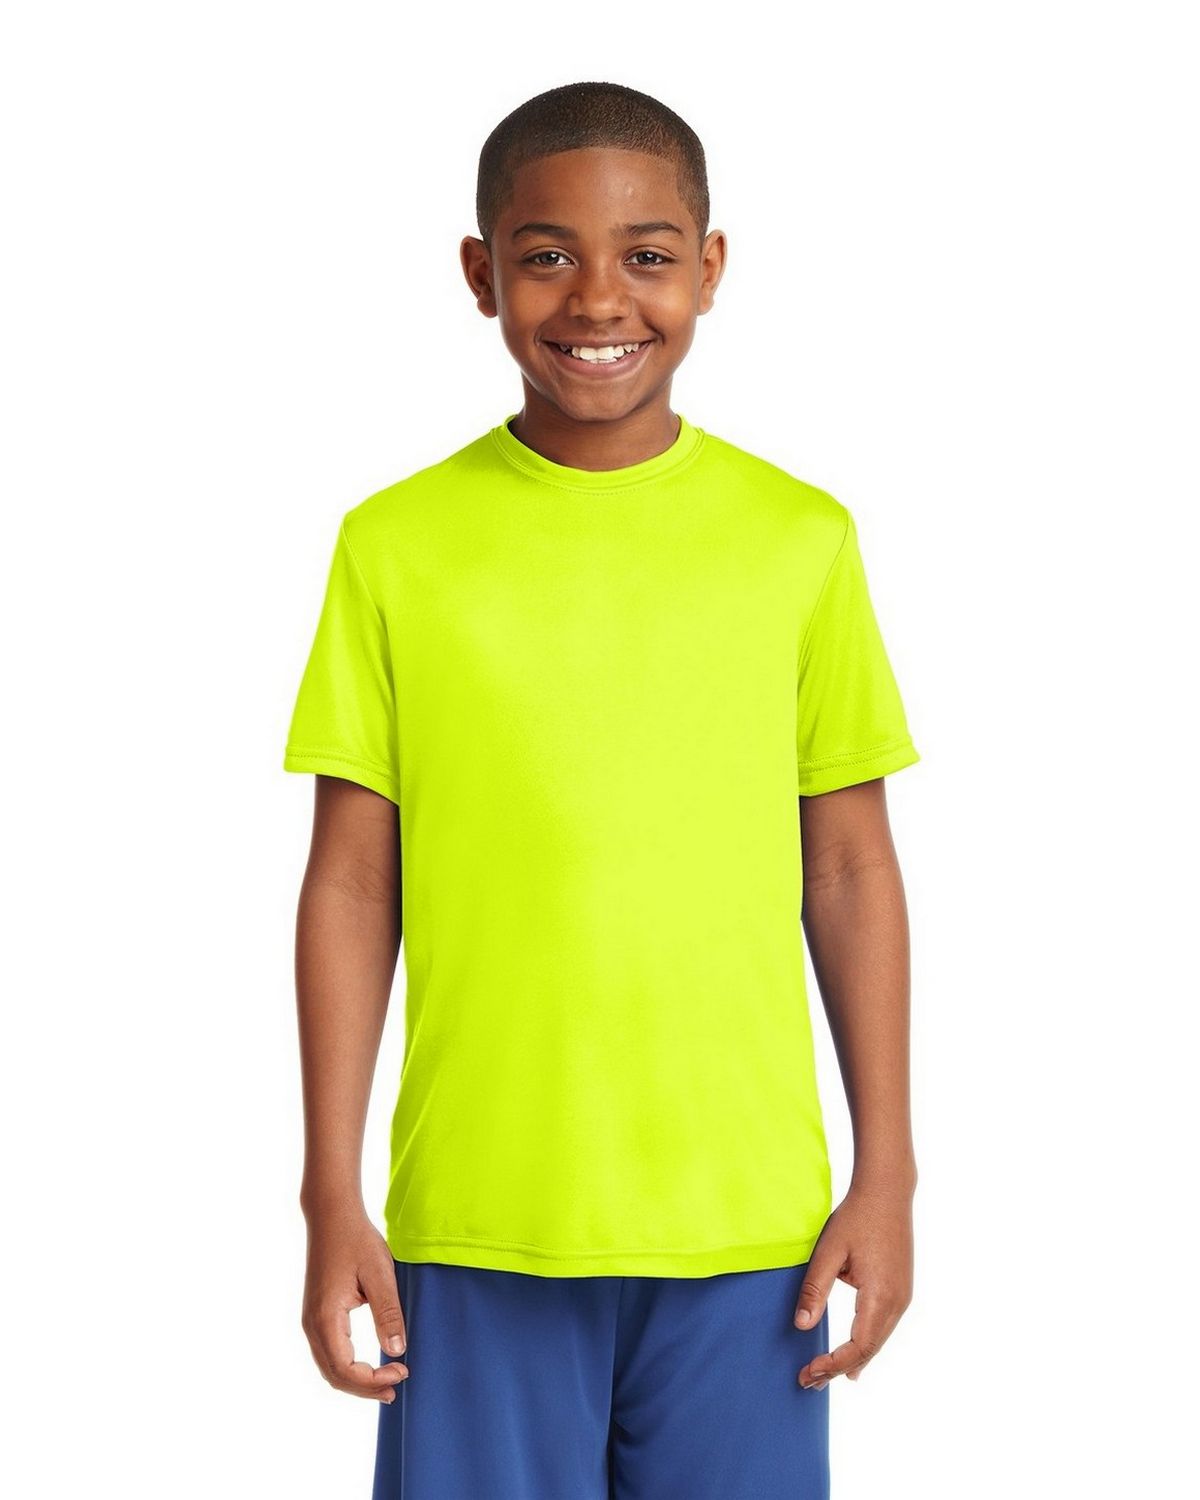 Sport-Tek YST350 Youth Competitor Tee by Port Authority - ApparelnBags.com